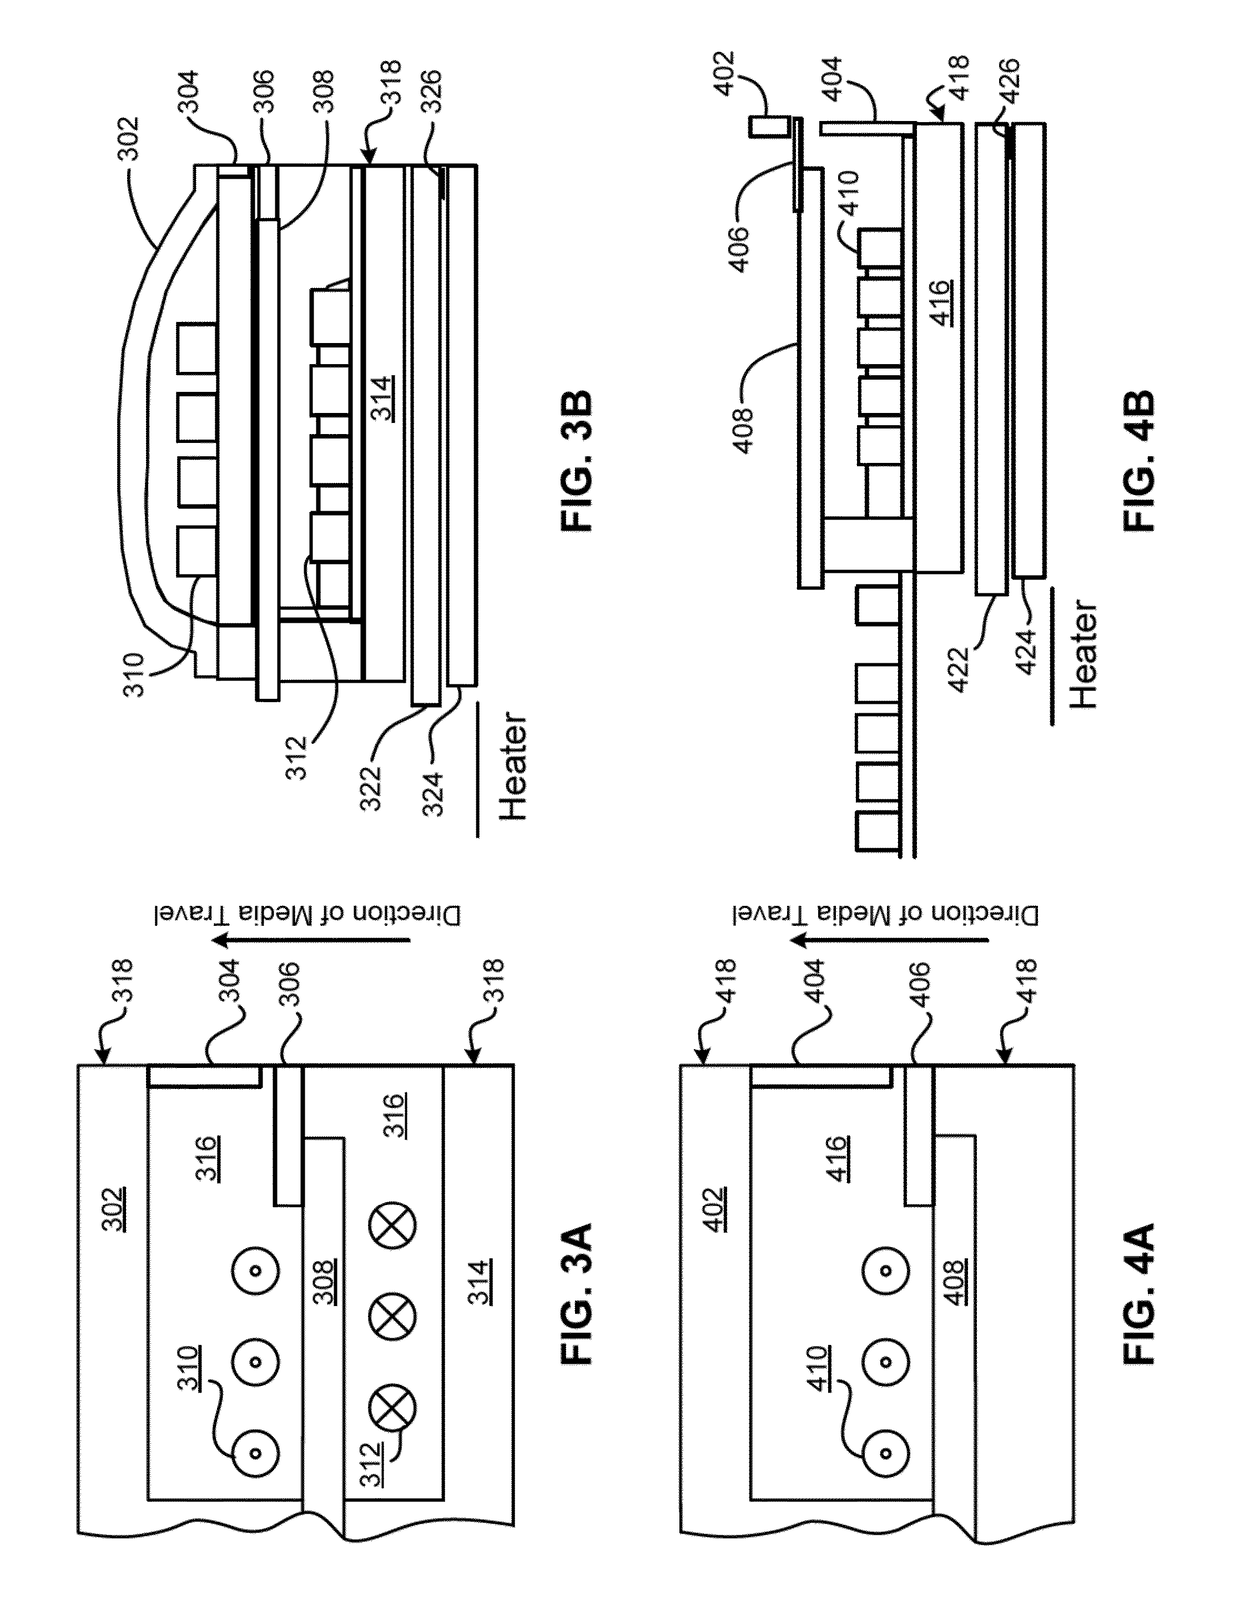 Microwave-assisted magnetic recording head having a current confinement structure